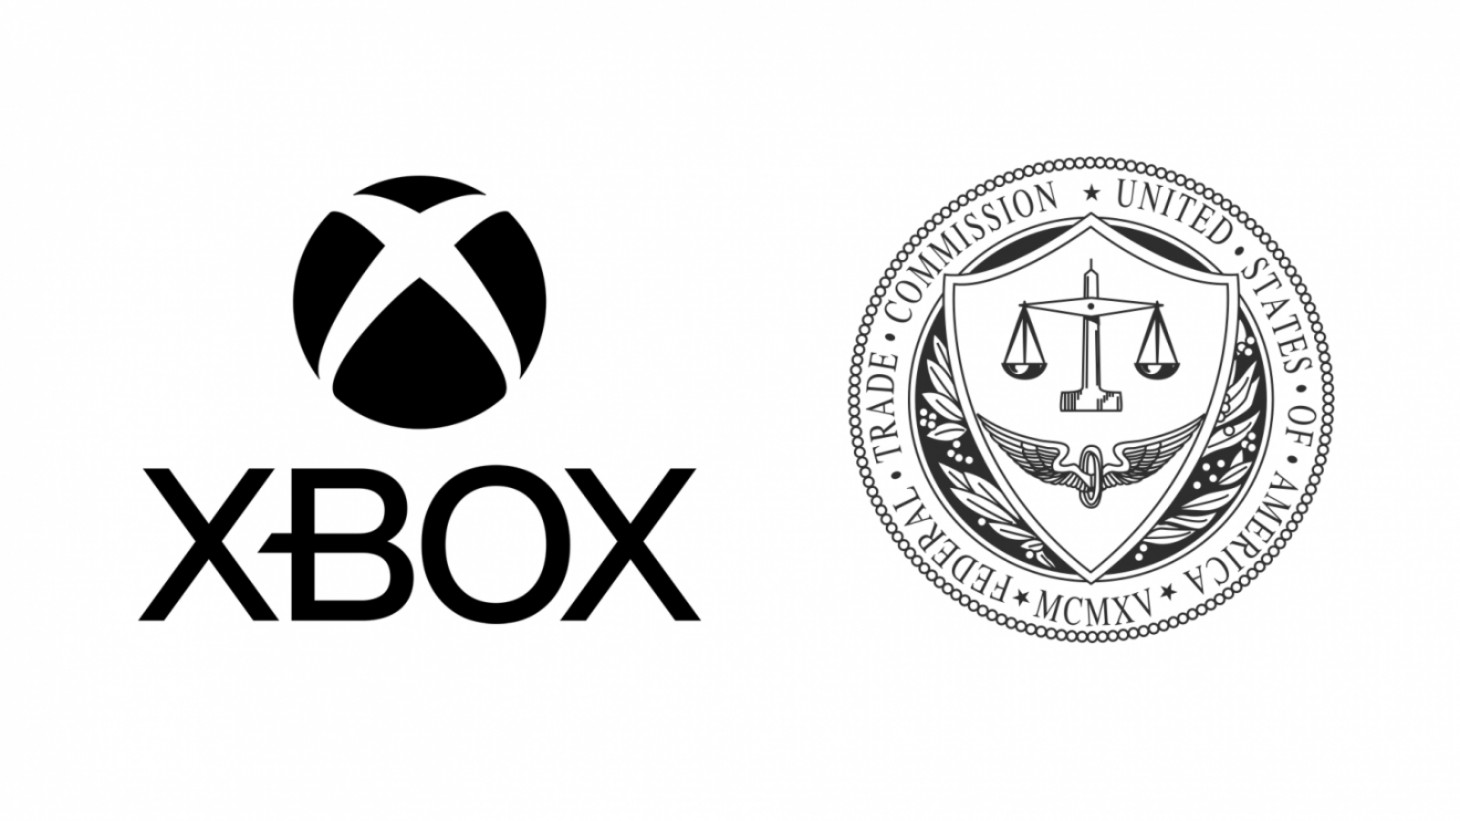 Court Denies FTC Move to Block Microsoft's Activision Blizzard Deal